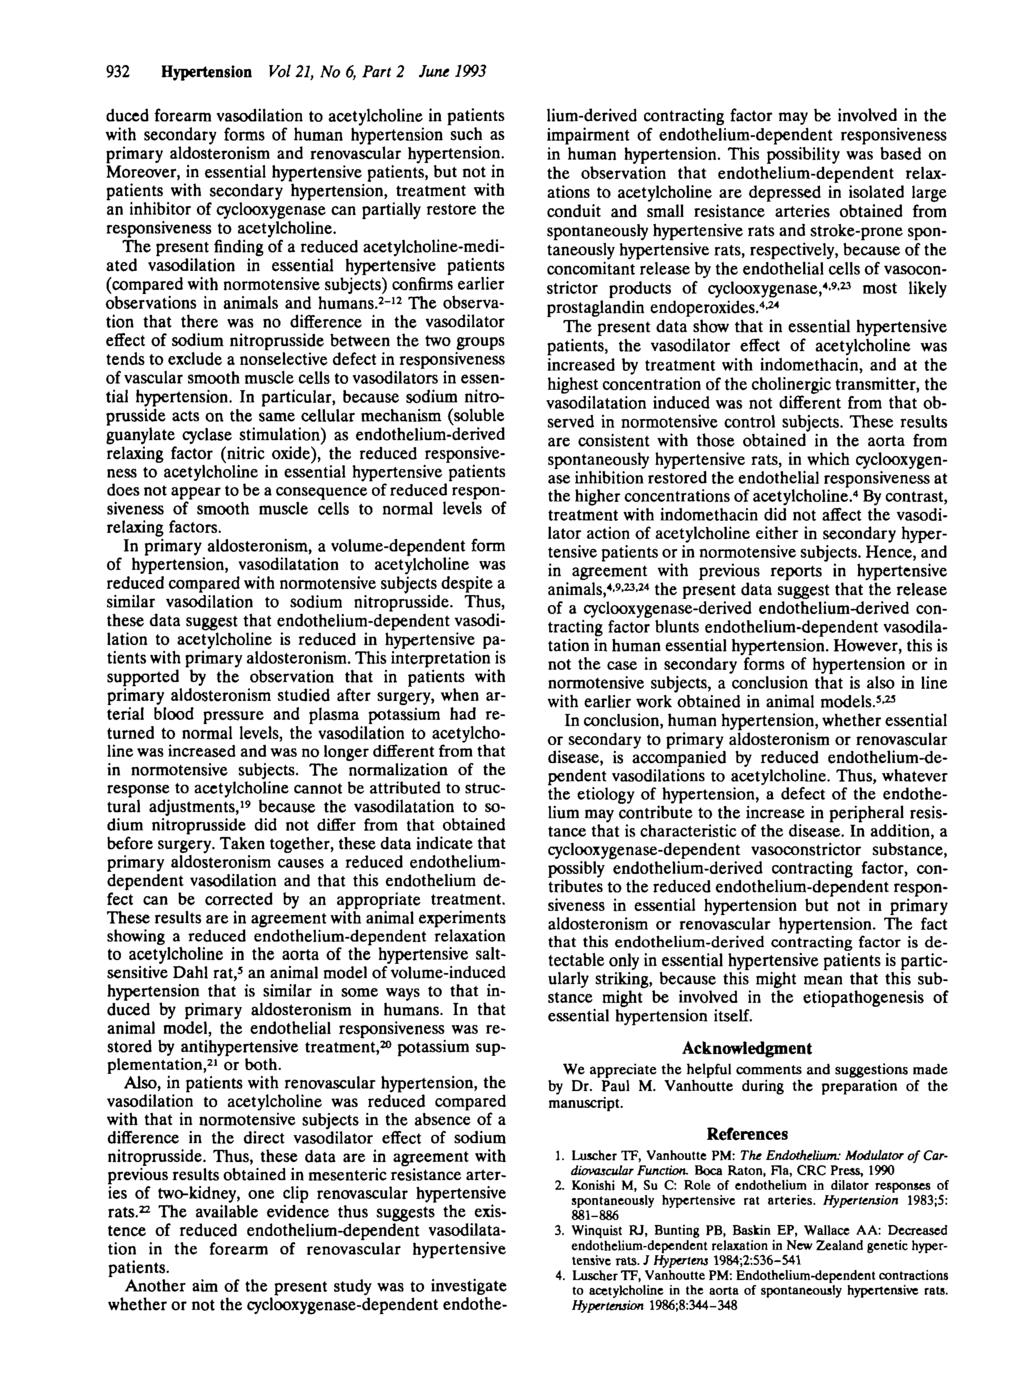 932 Hypertension Vol 21, No 6, Part 2 June 1993 duced forearm vasodilation to acetylcholine in patients with secondary forms of human hypertension such as primary aldosteronism and renovascular